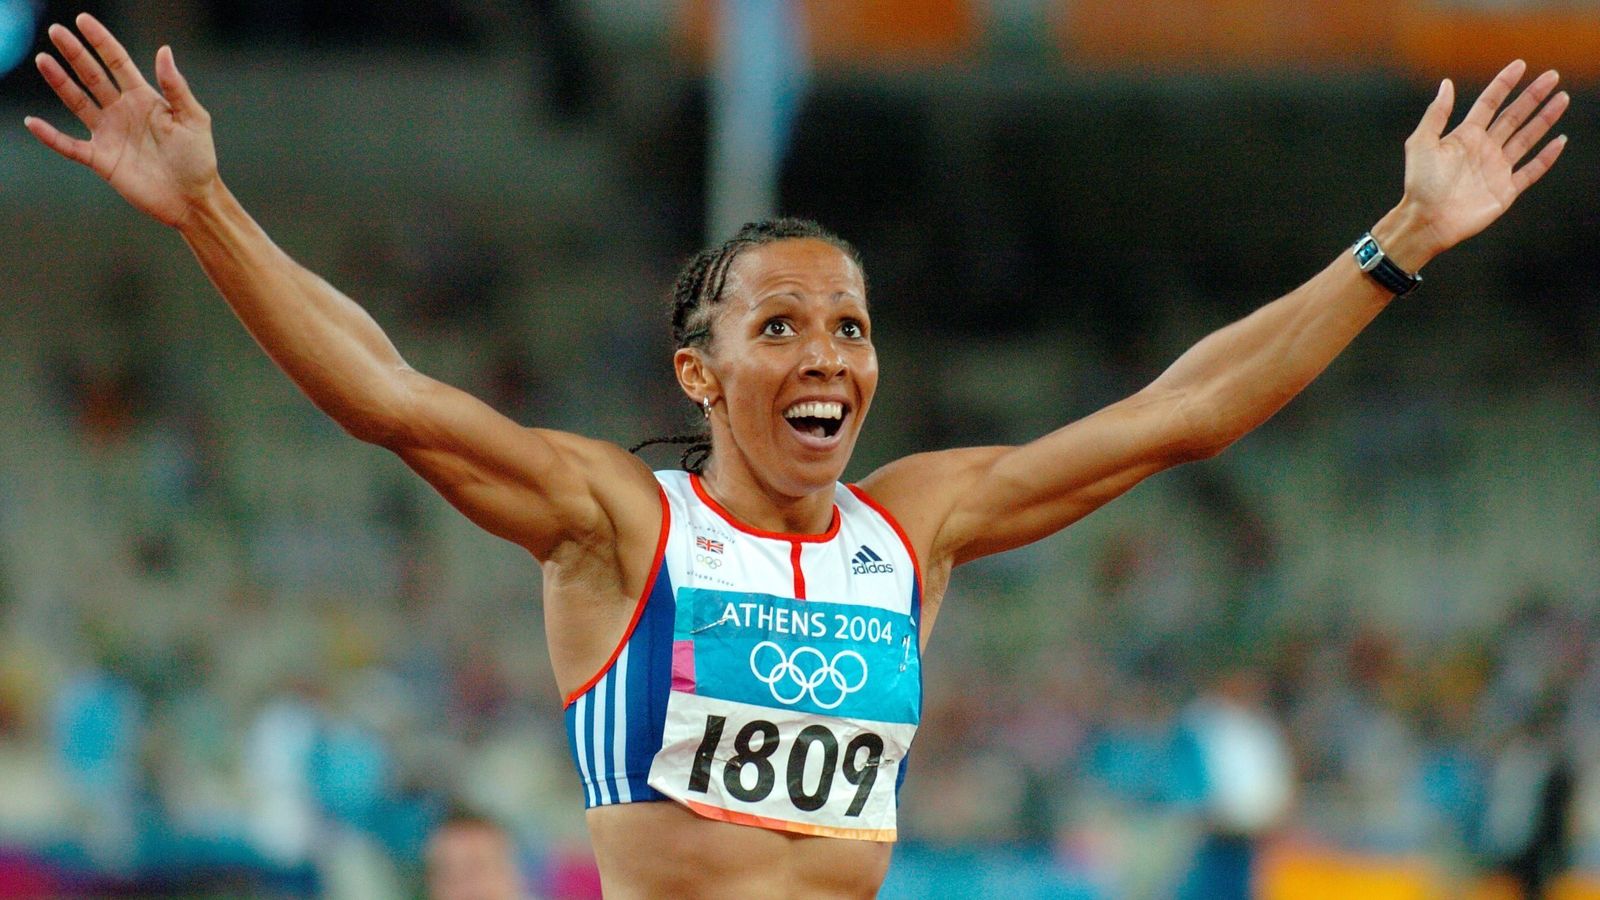 Dame Kelly Holmes opens up about her own struggles with mental health problems